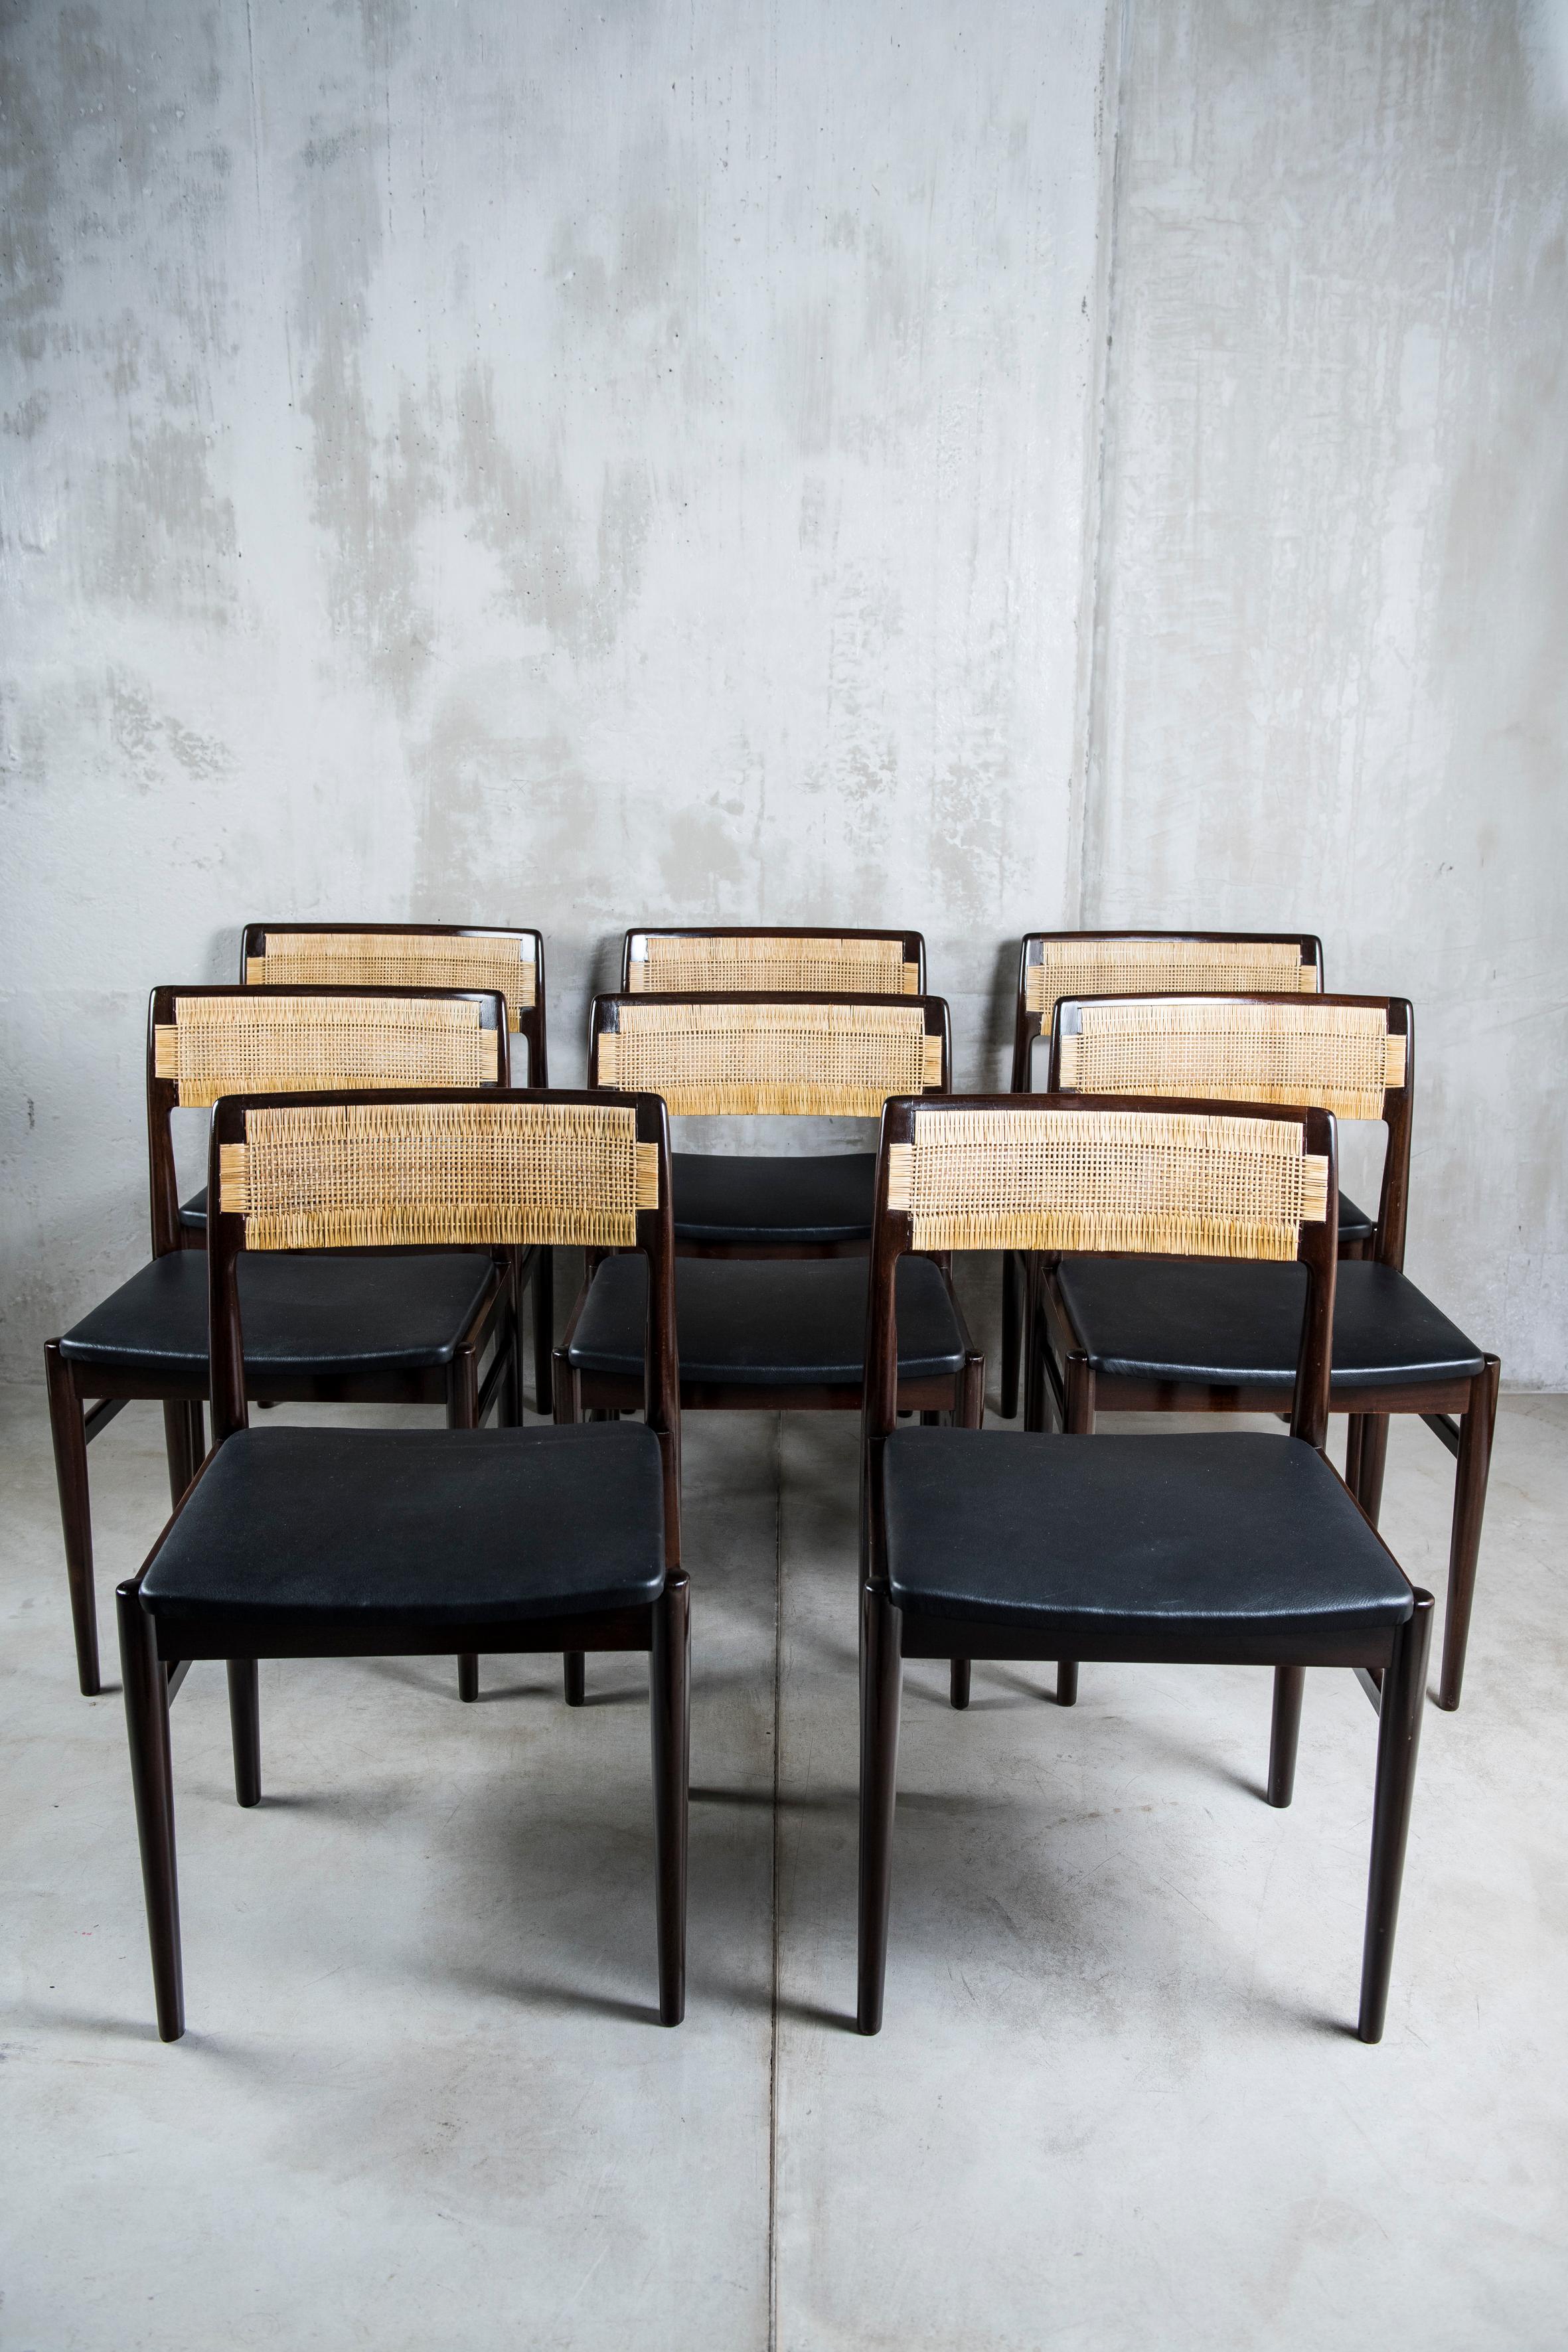 Wood Set of Eight Dining Room Chairs Design by Erik Worts, Denmark, circa 1960.